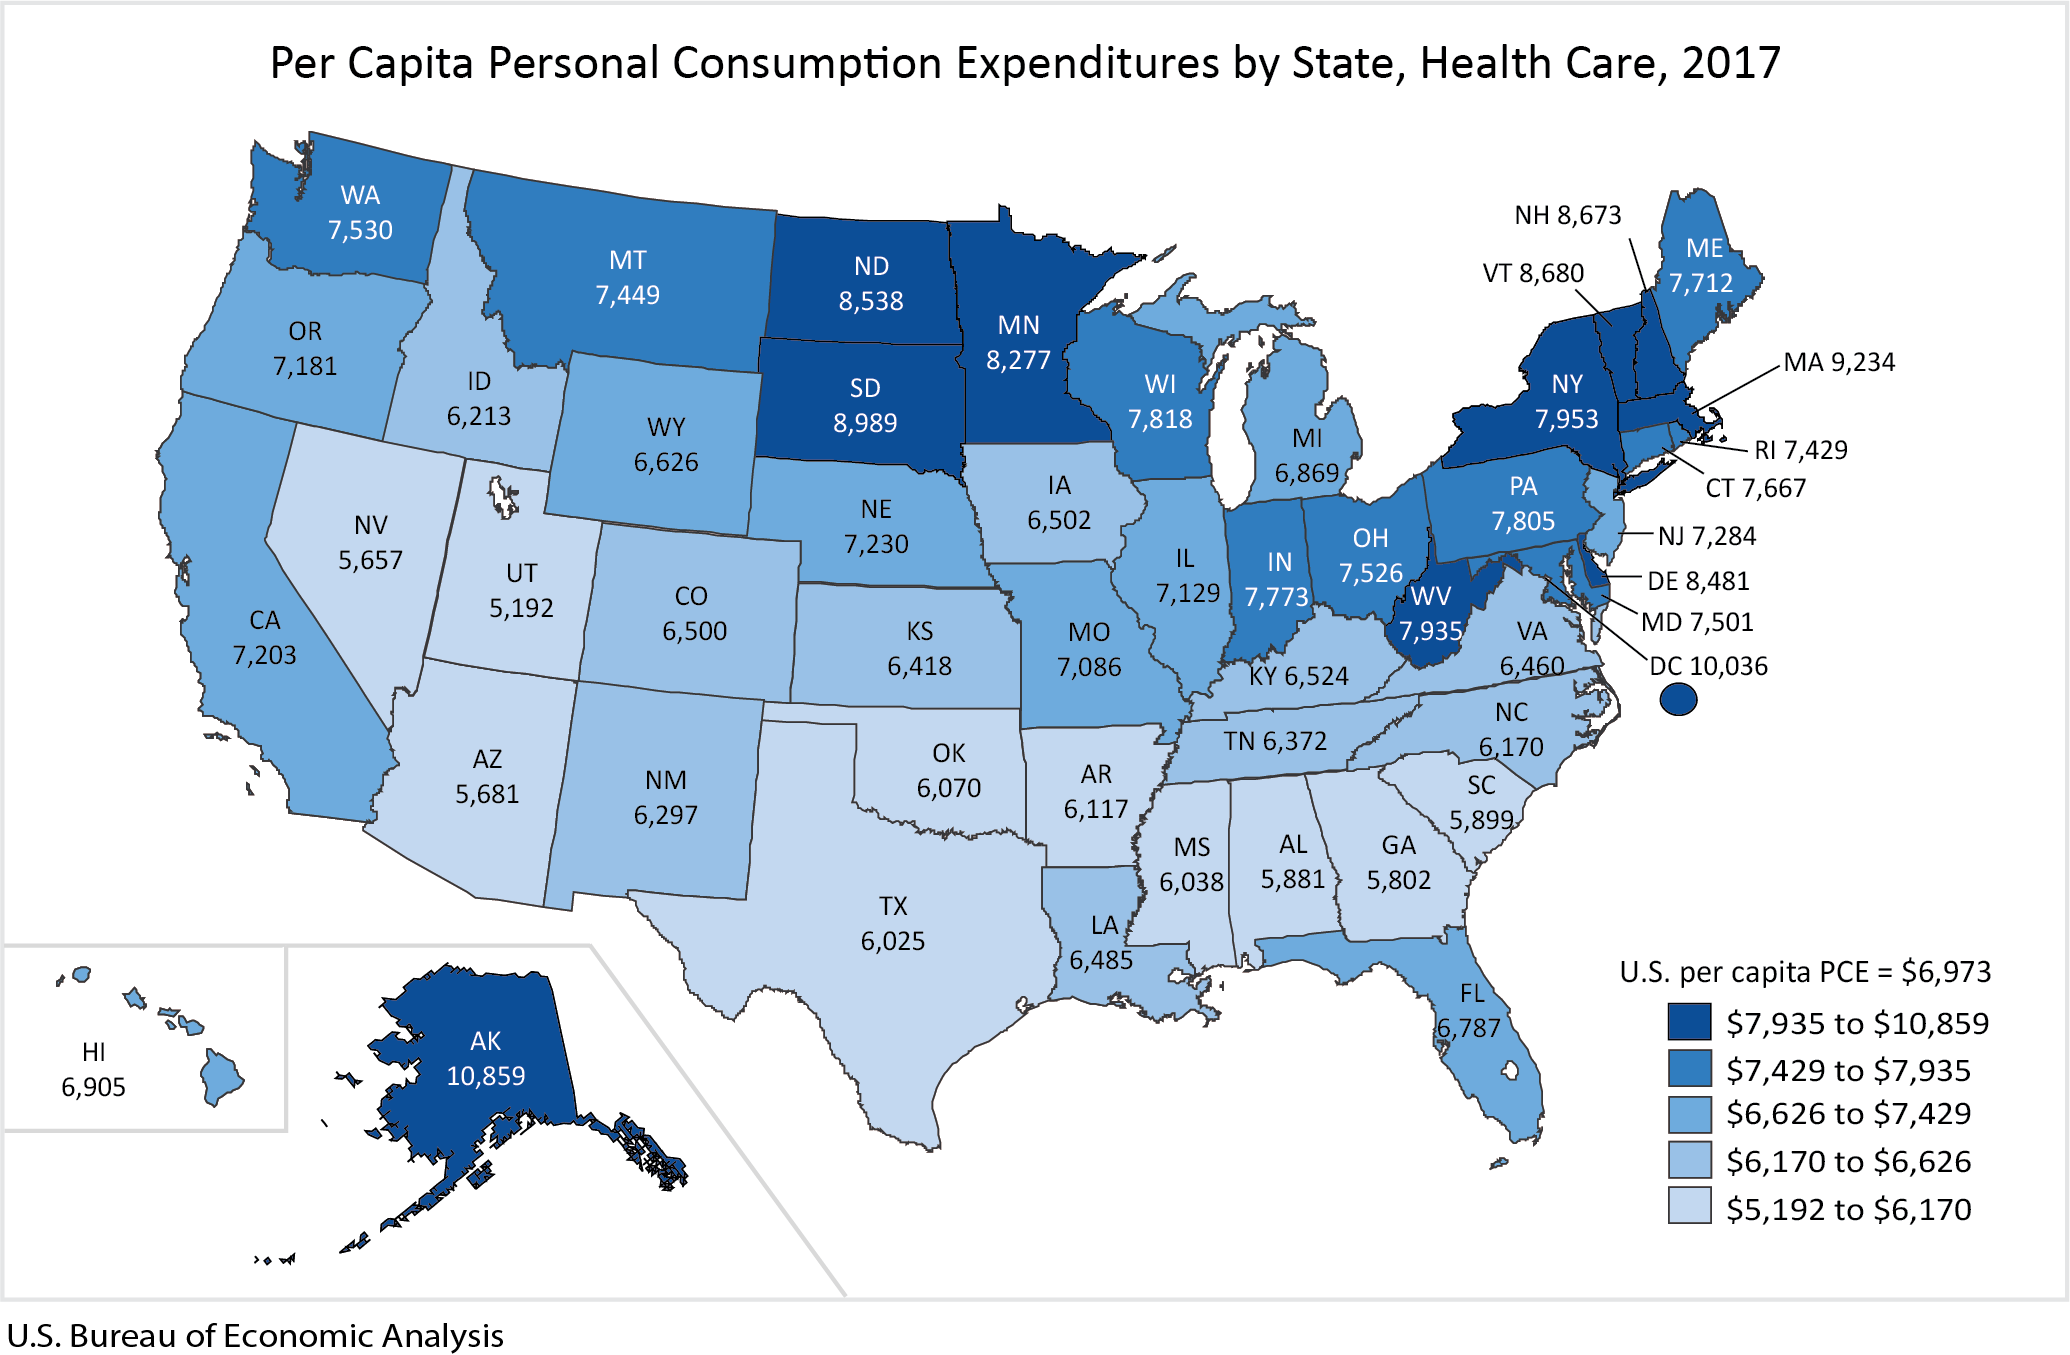 Per Capita Personal Consumption Expenditures by State, Health Care, 2017